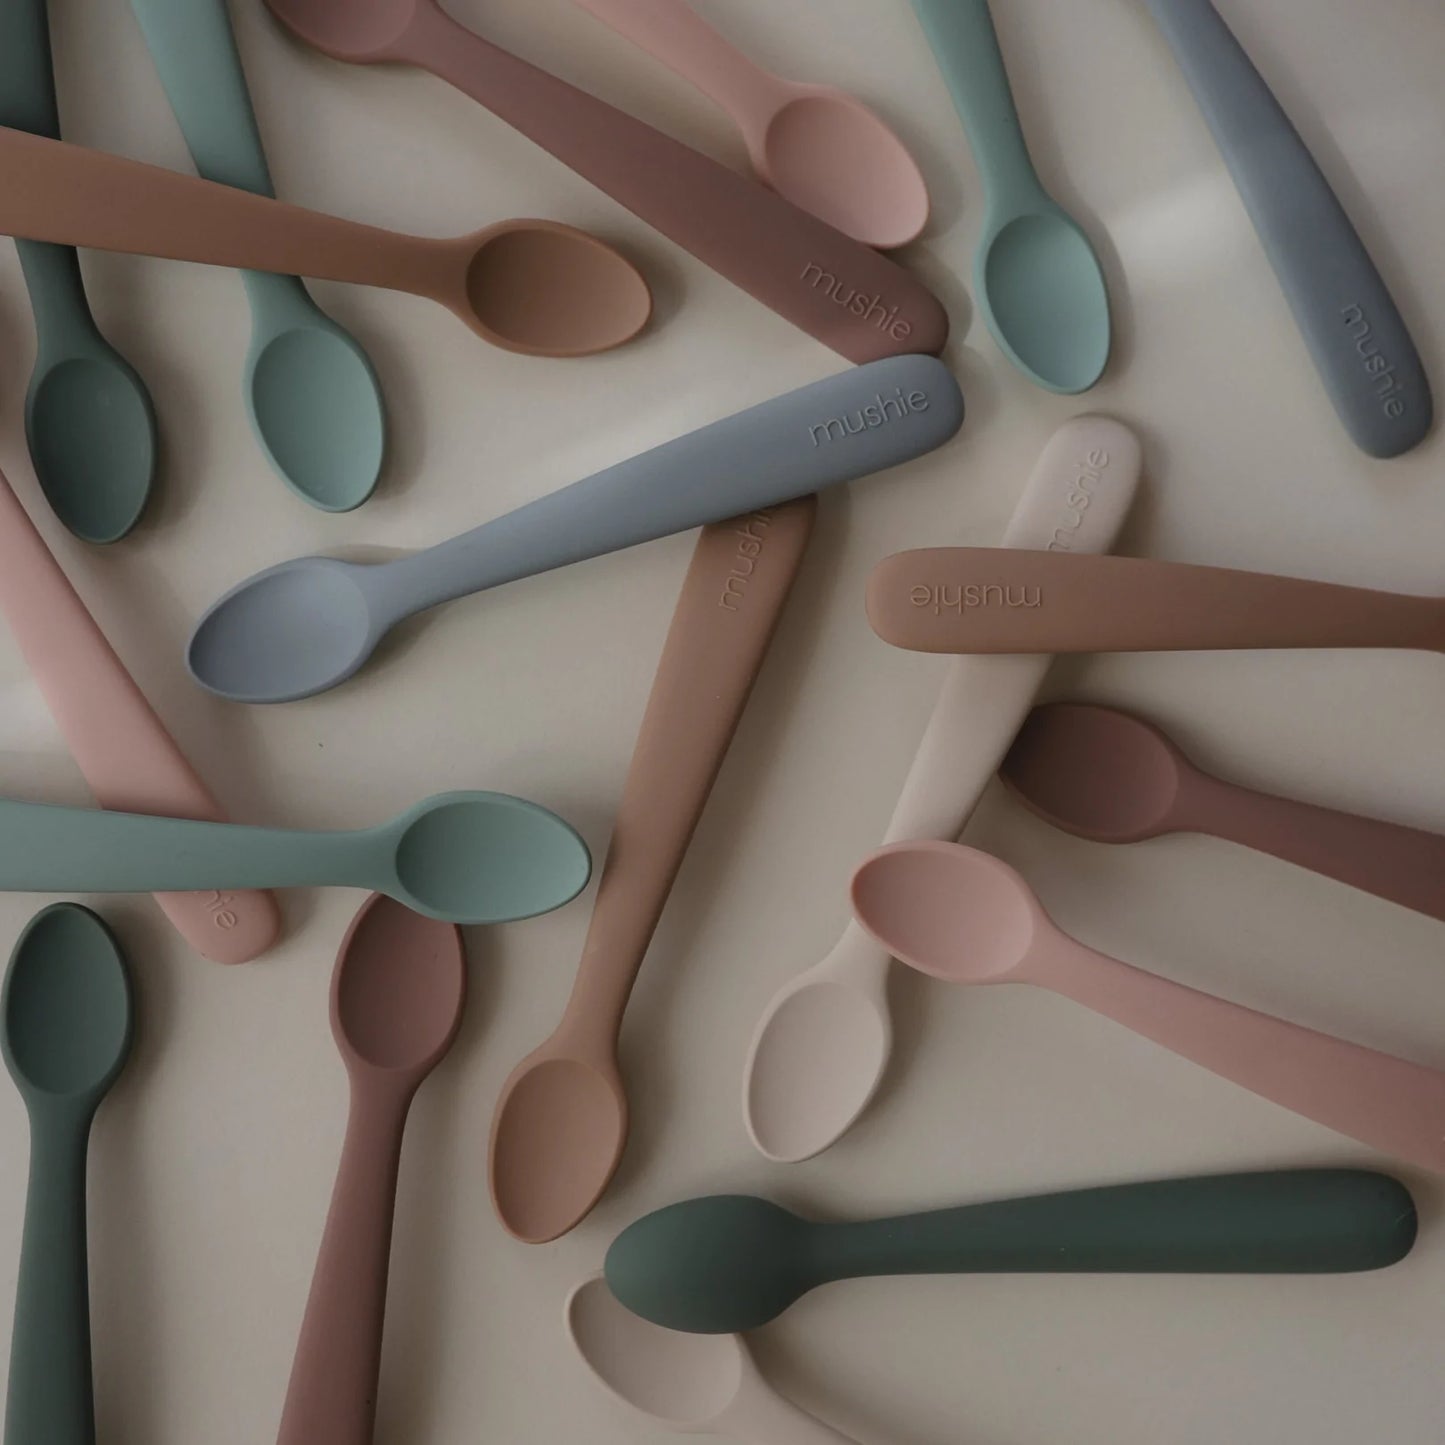 Load image into Gallery viewer, Silicone Feeding Spoons - Ivory
